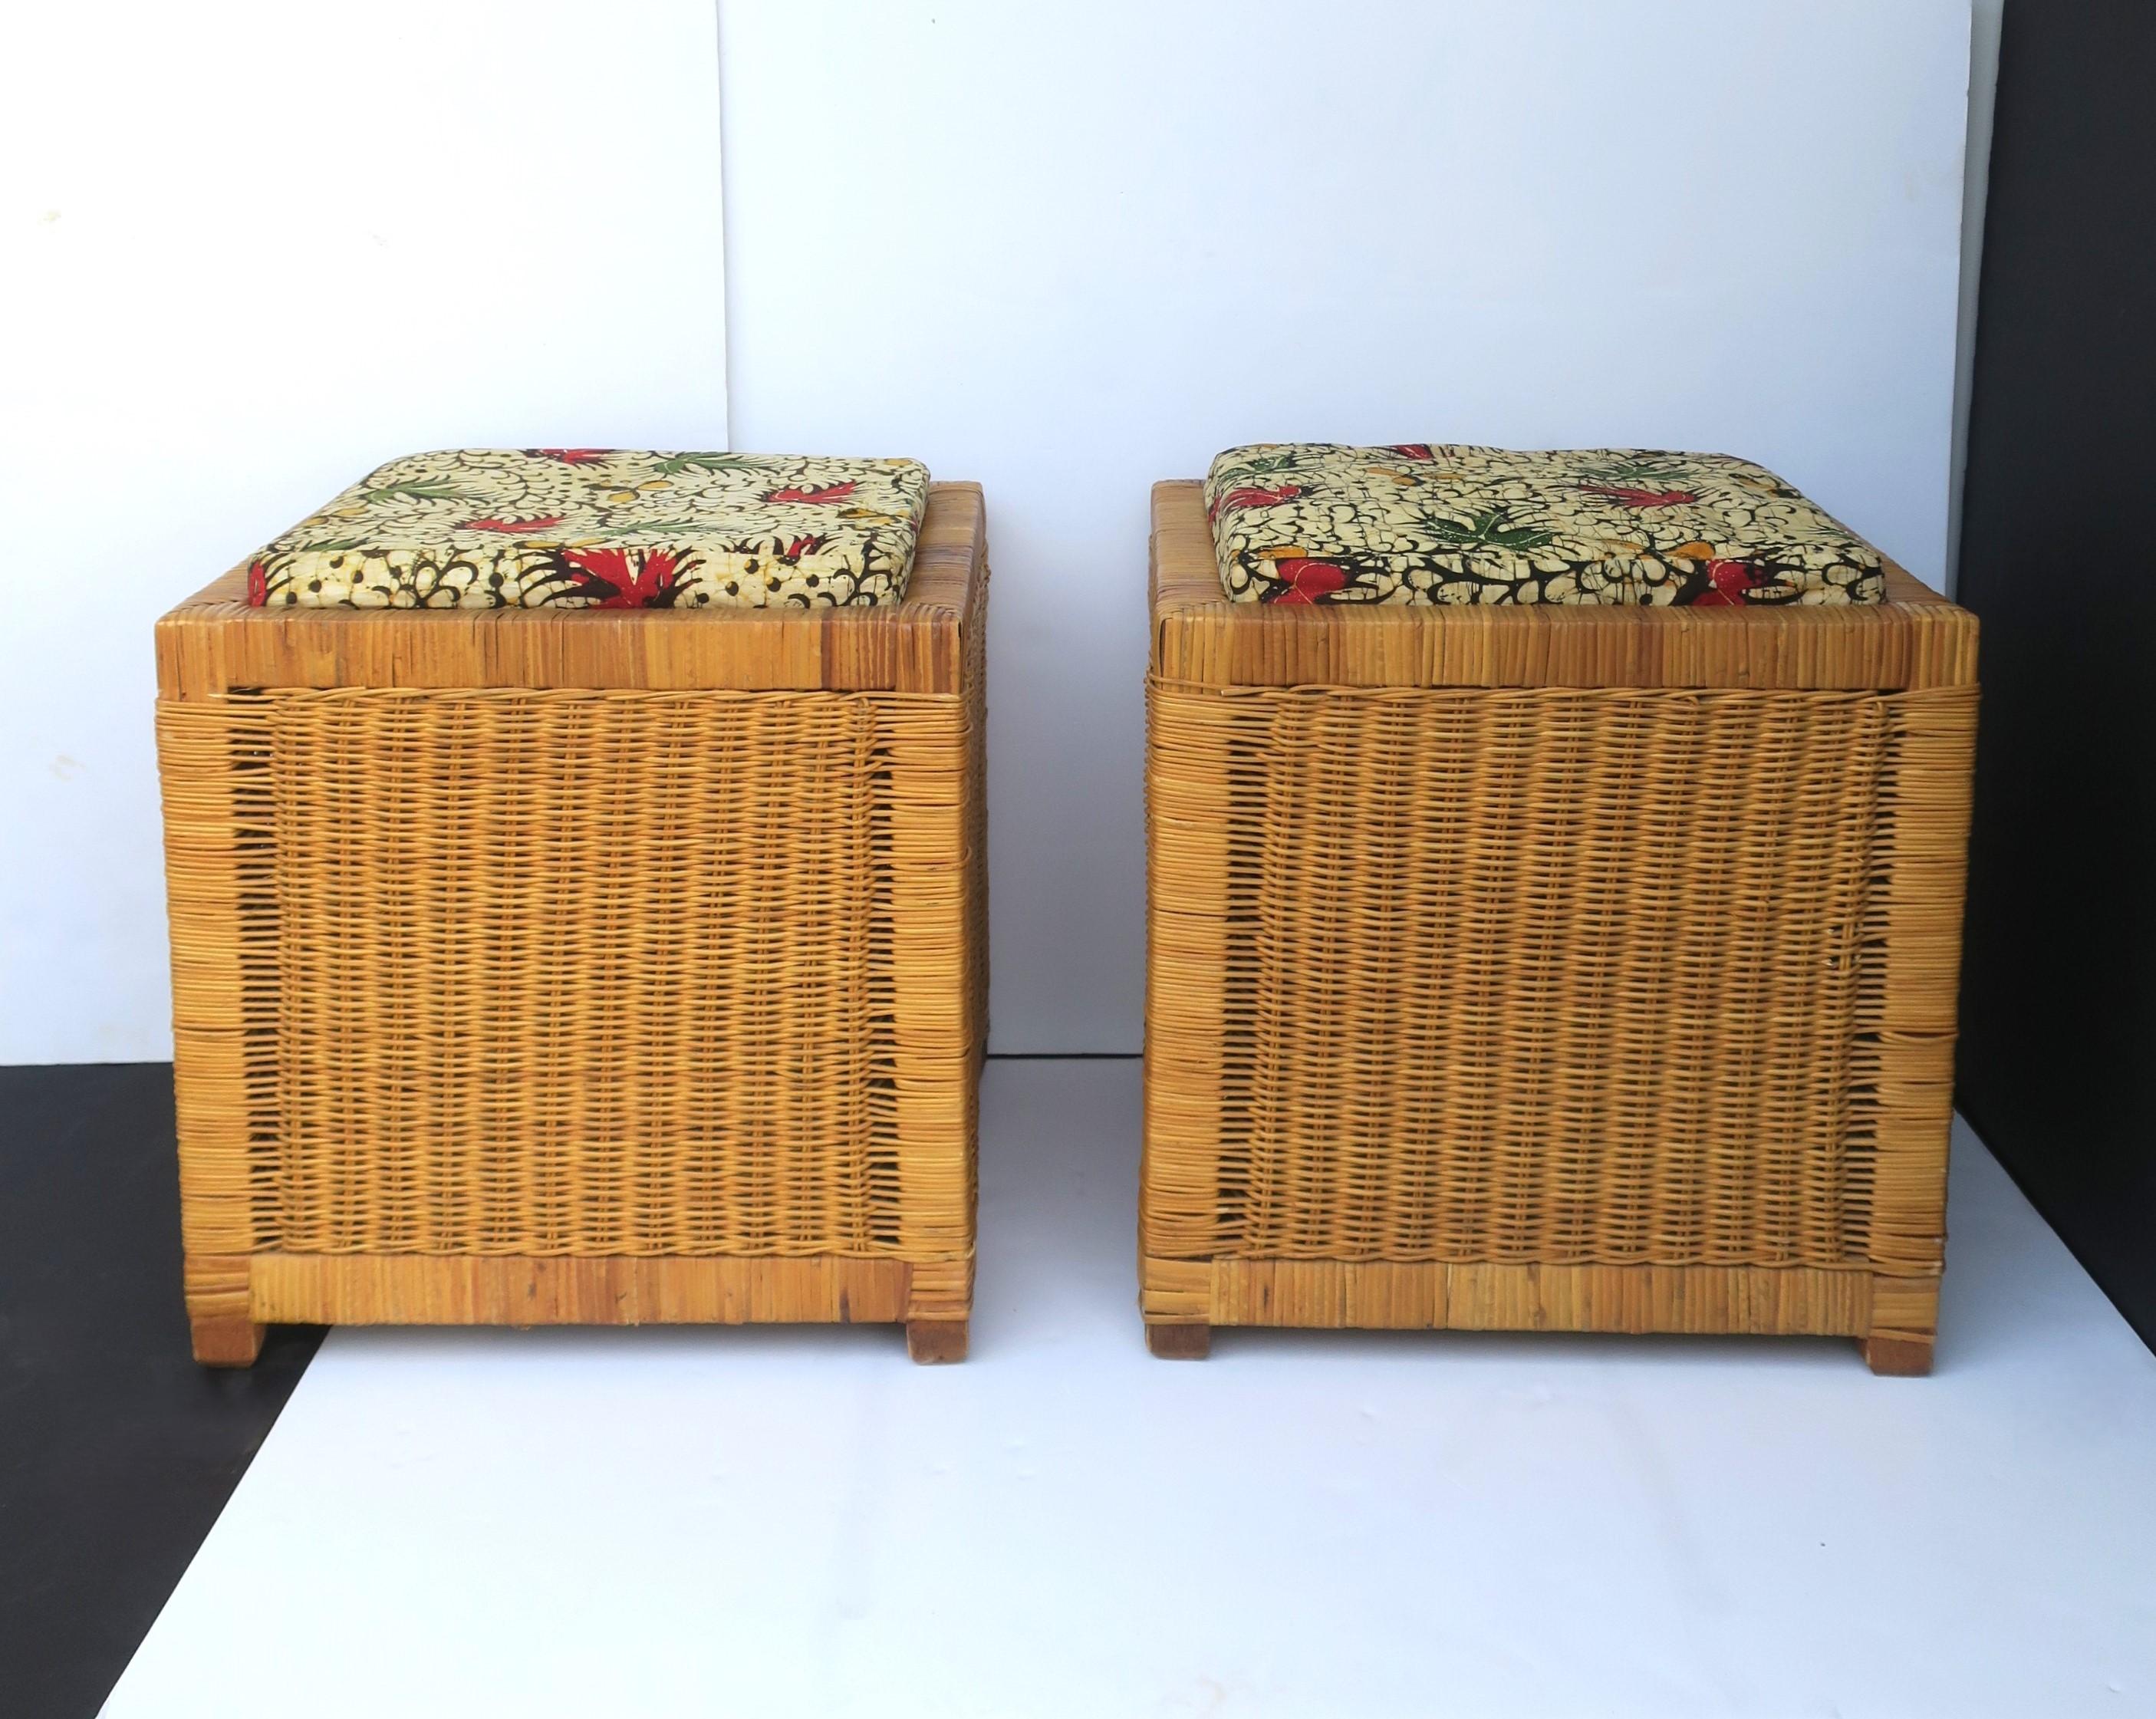 A pair for square wicker stools or benches with seat cushions, circa late20th century. Dimensions: 17